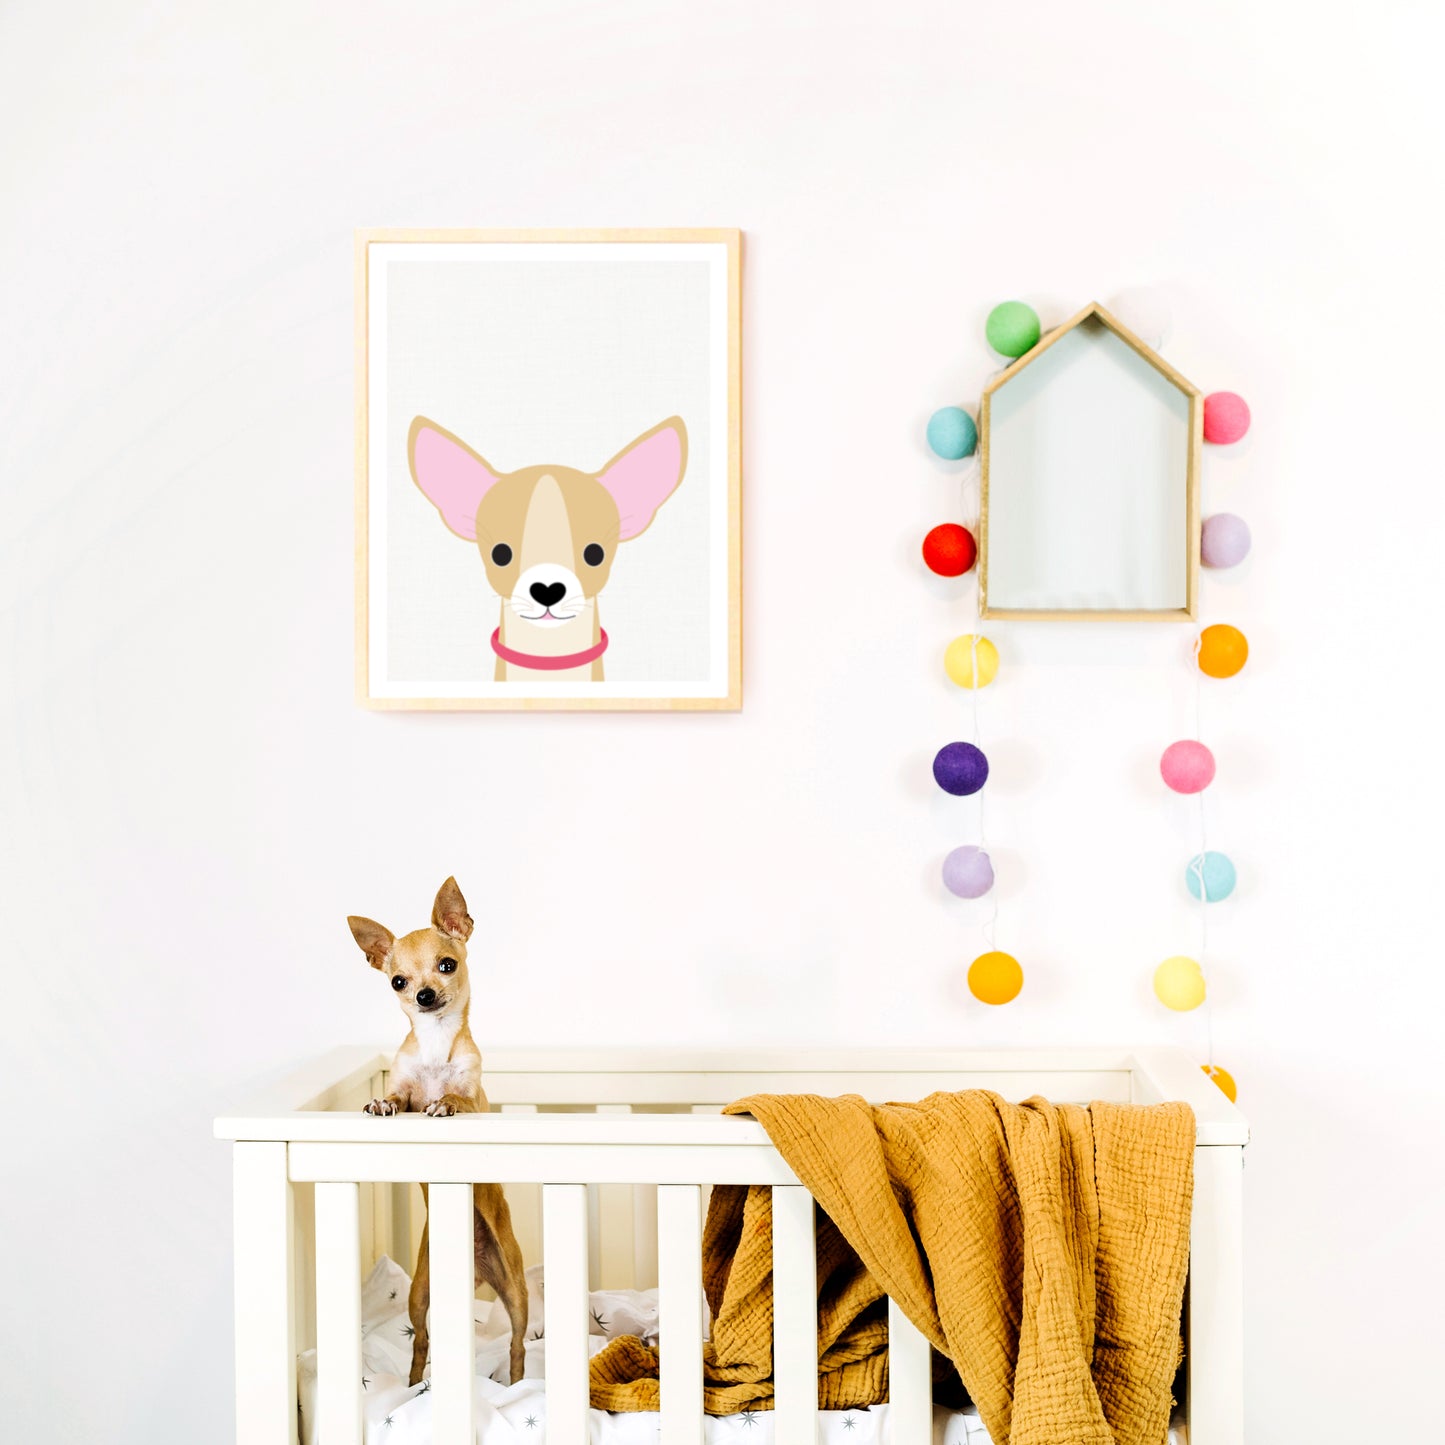 Chihuahua print in nursery above a cot with Chihuahua dog inside